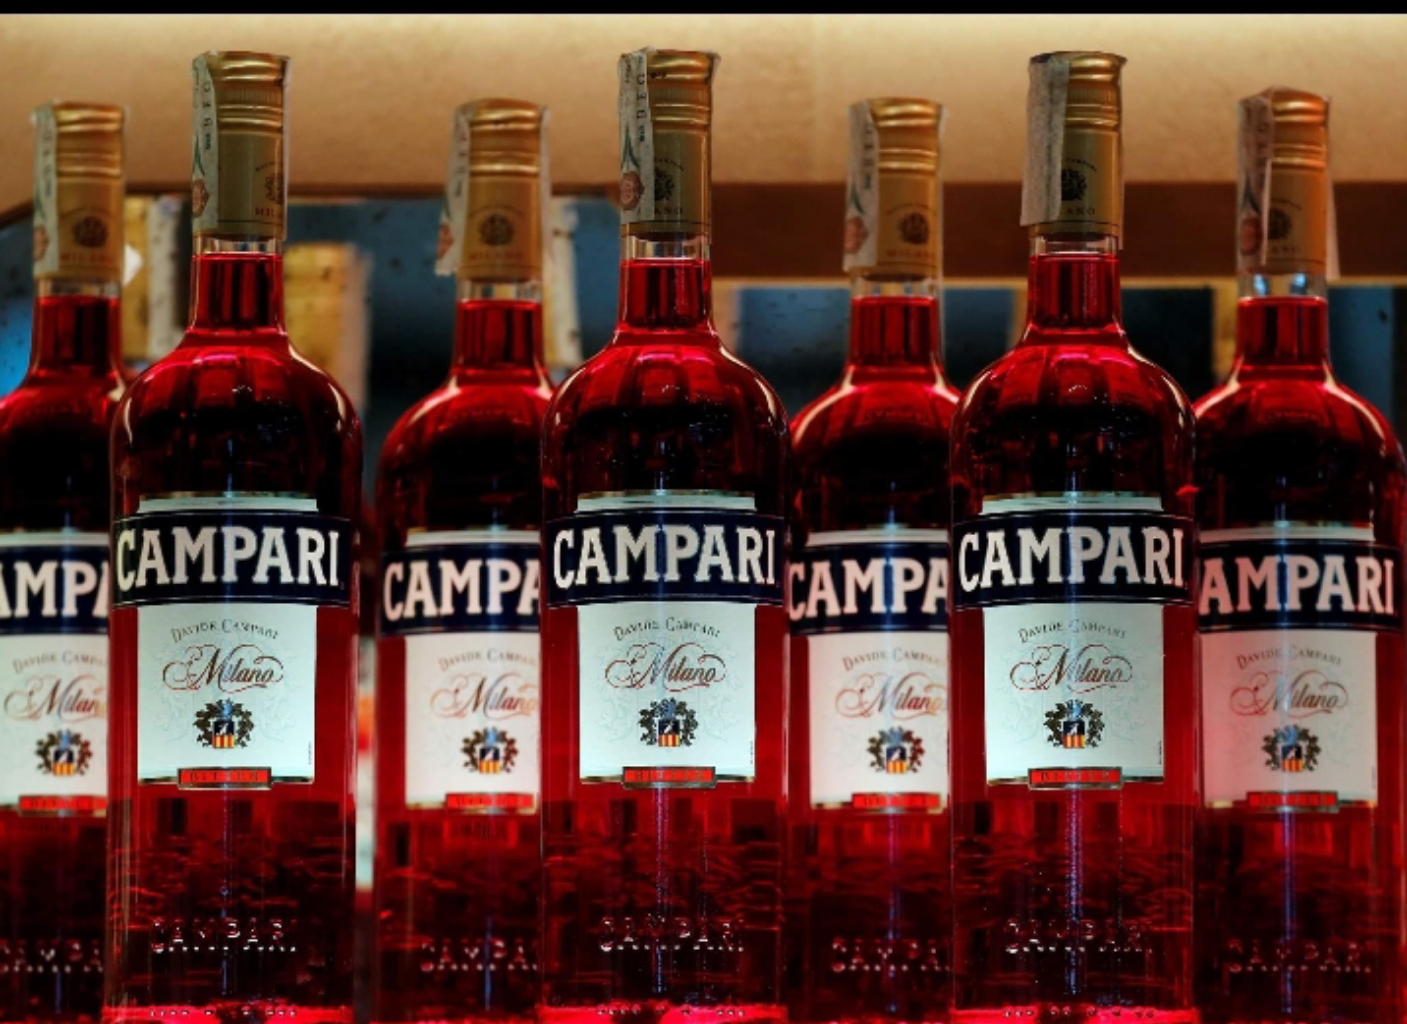 ITALY’S CAMPARI TO BUY WILDERNESS TRAIL DISTILLERY FOR $420 MILLION